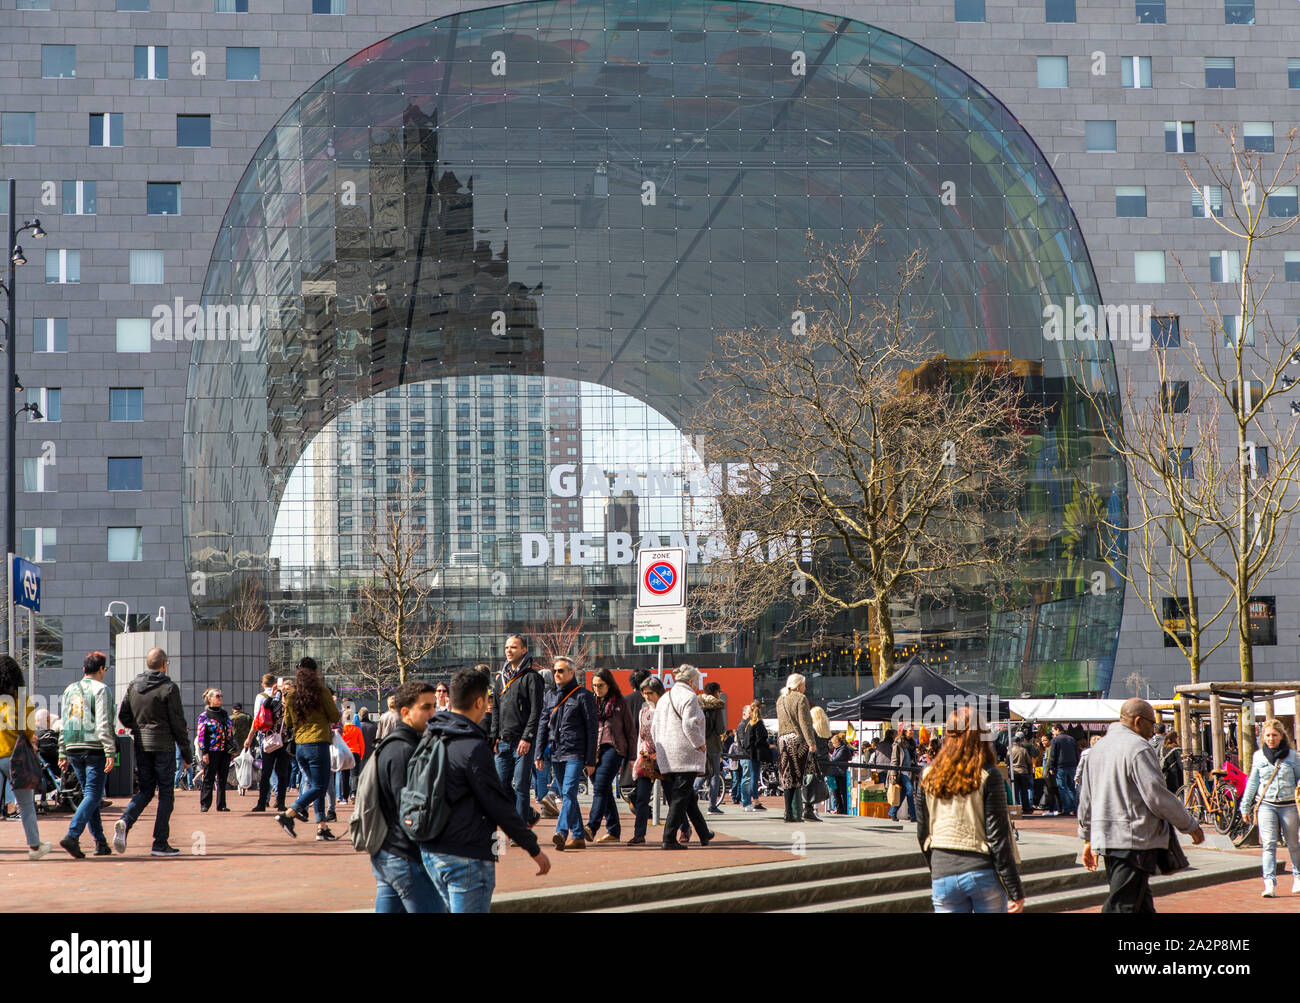 The Markthal in Rotterdam, Netherlands, inside a large market with grocery stores, restaurants, market stalls, the shell consists of apartments, Stock Photo